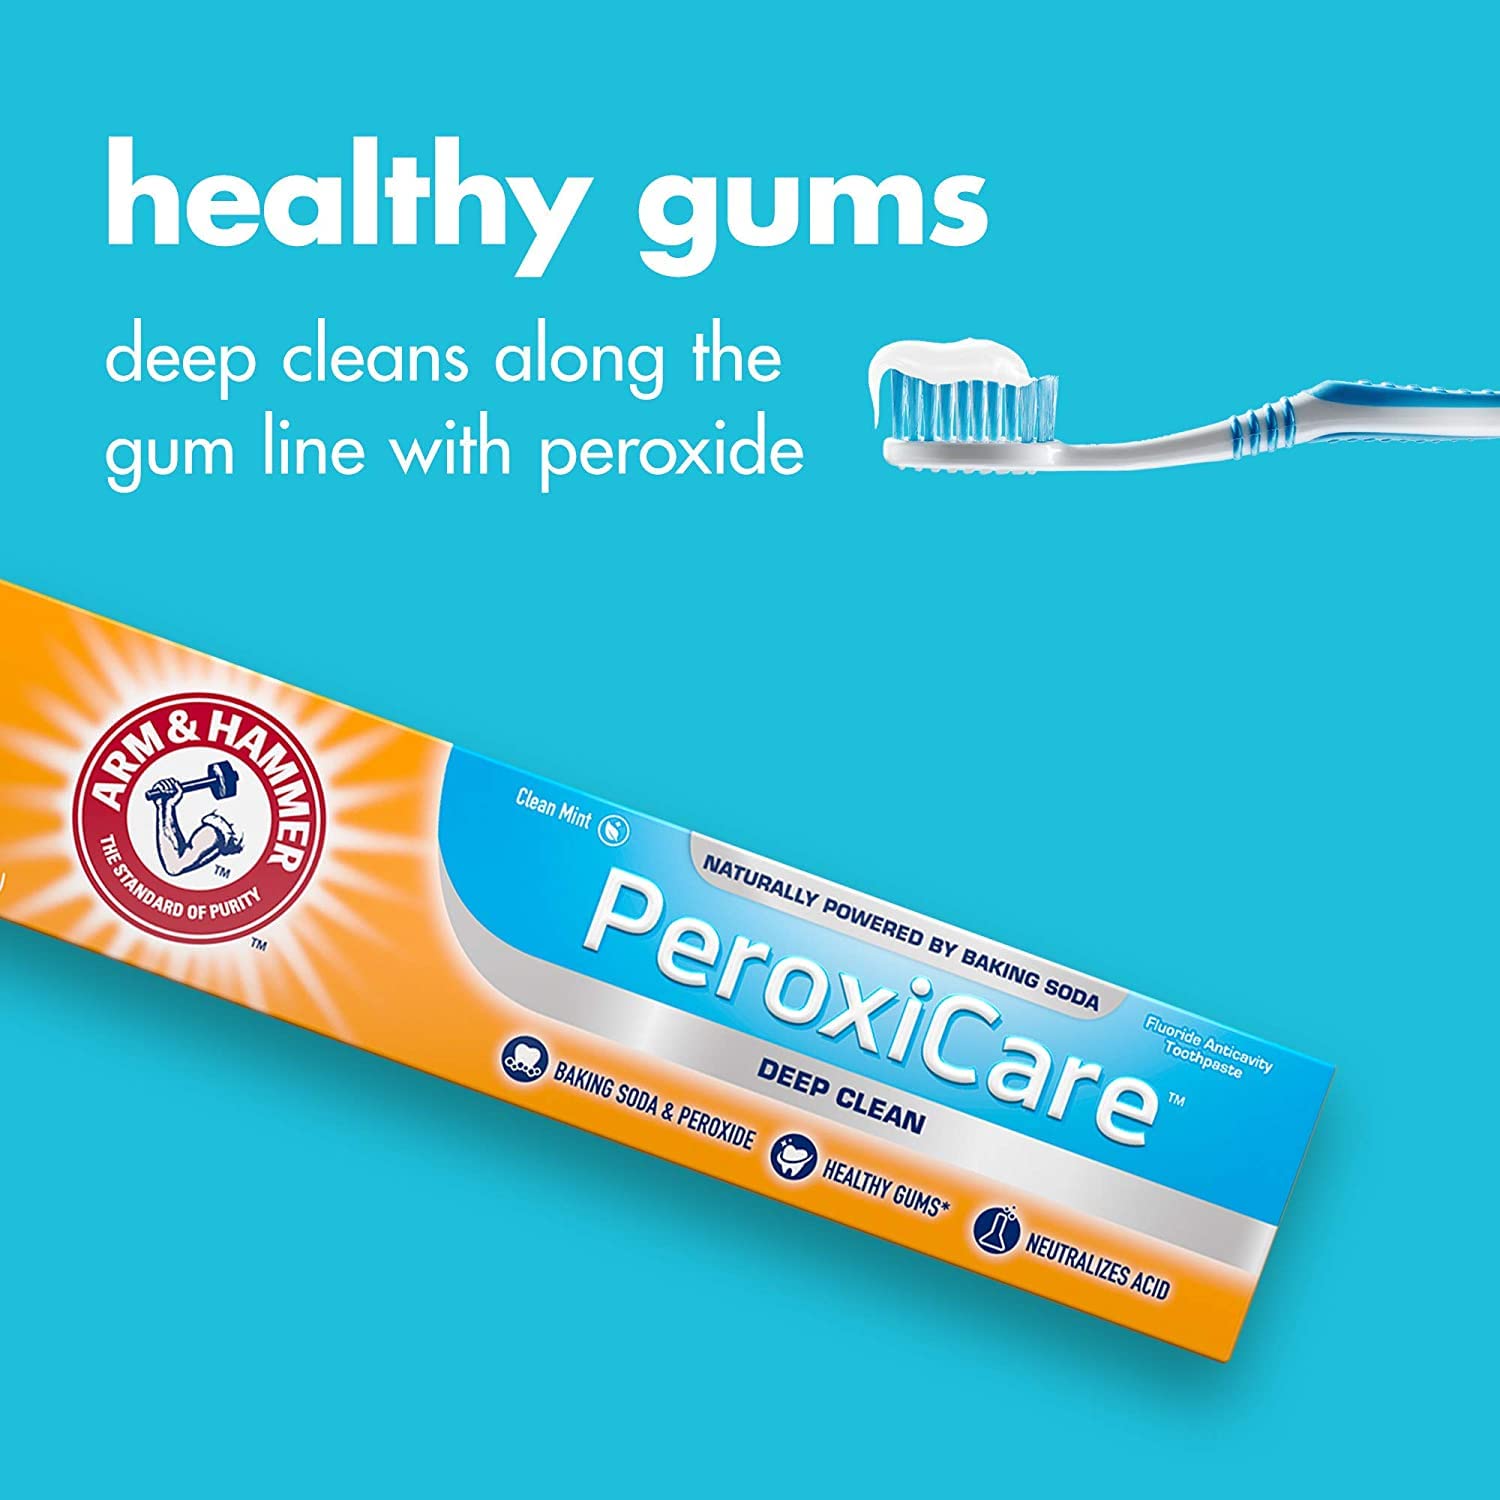 ARM & HAMMER PeroxiCare Tartar Control Toothpaste Baking Soda & Peroxide, Fresh Mint 6 oz (Pack of 2)